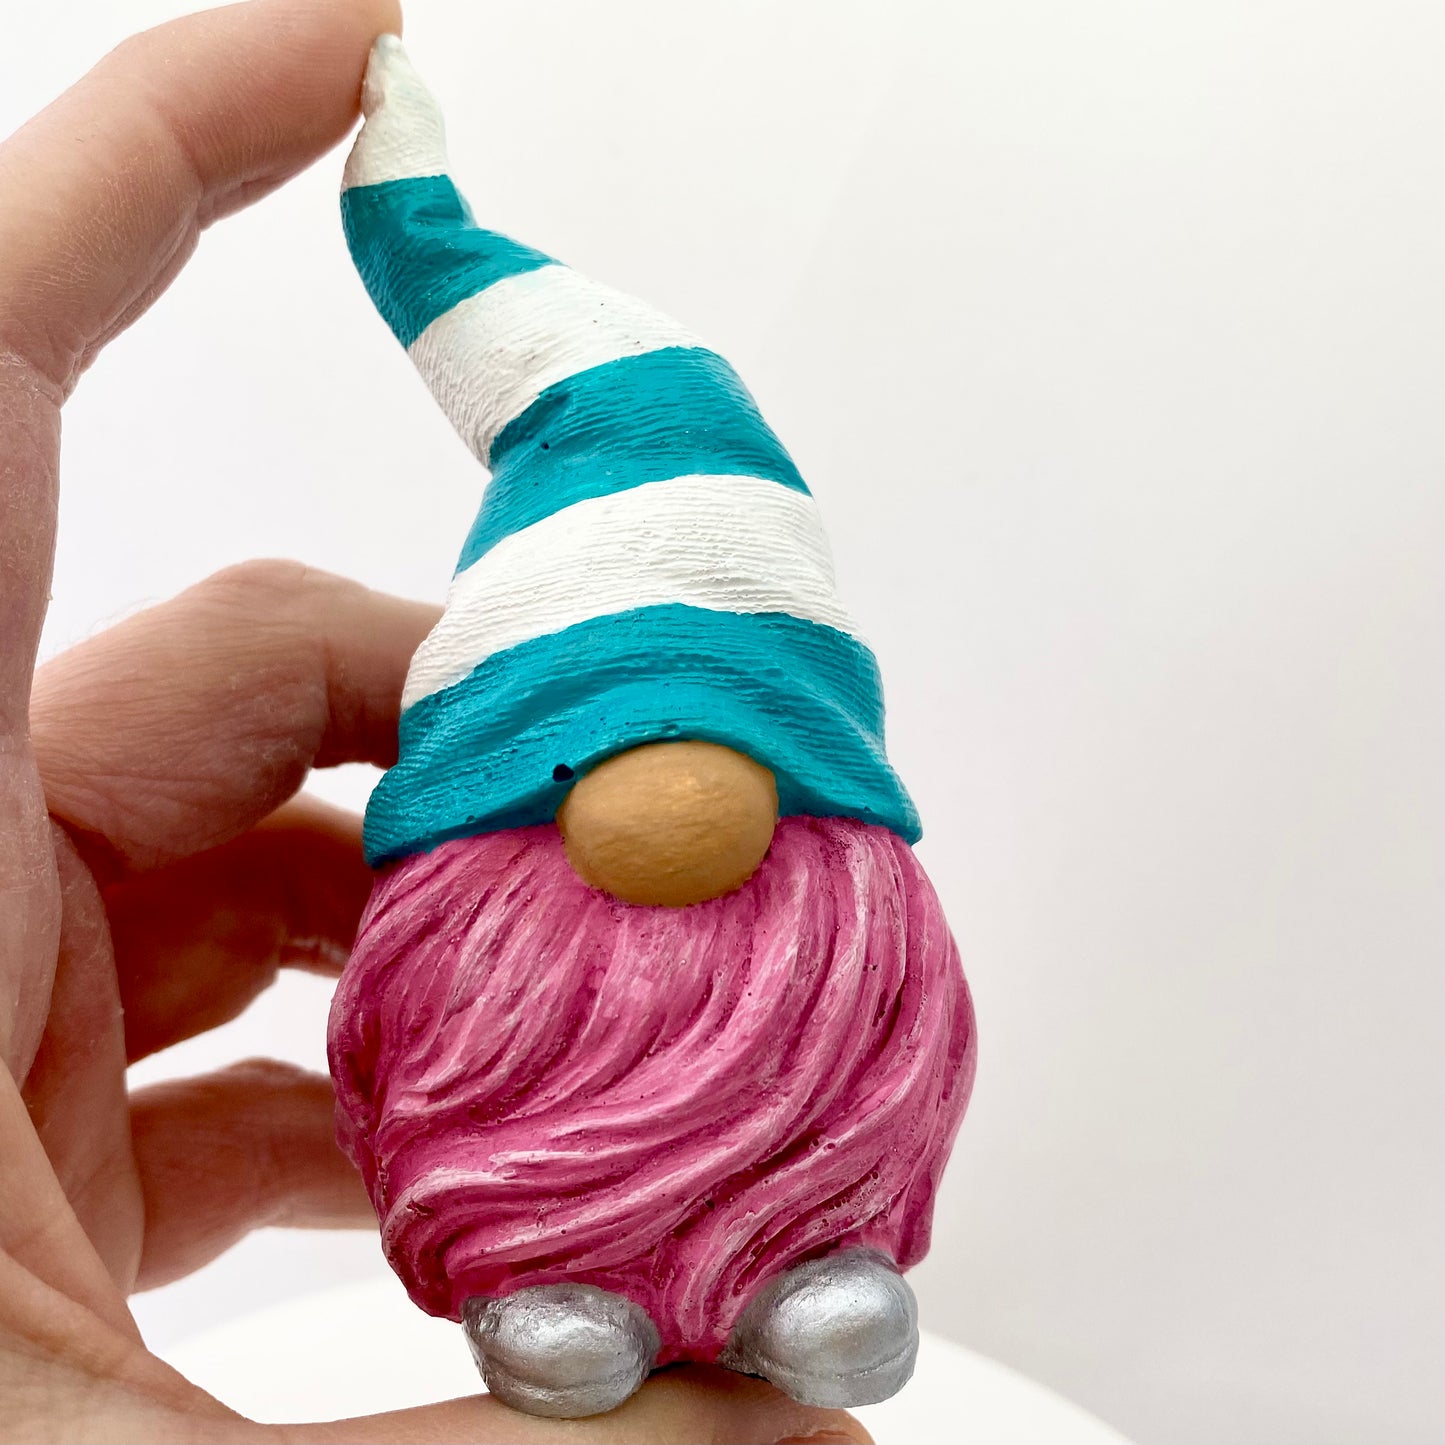 Hand painted Gonk statue with pink beard and teal and white striped hat  Edit alt text